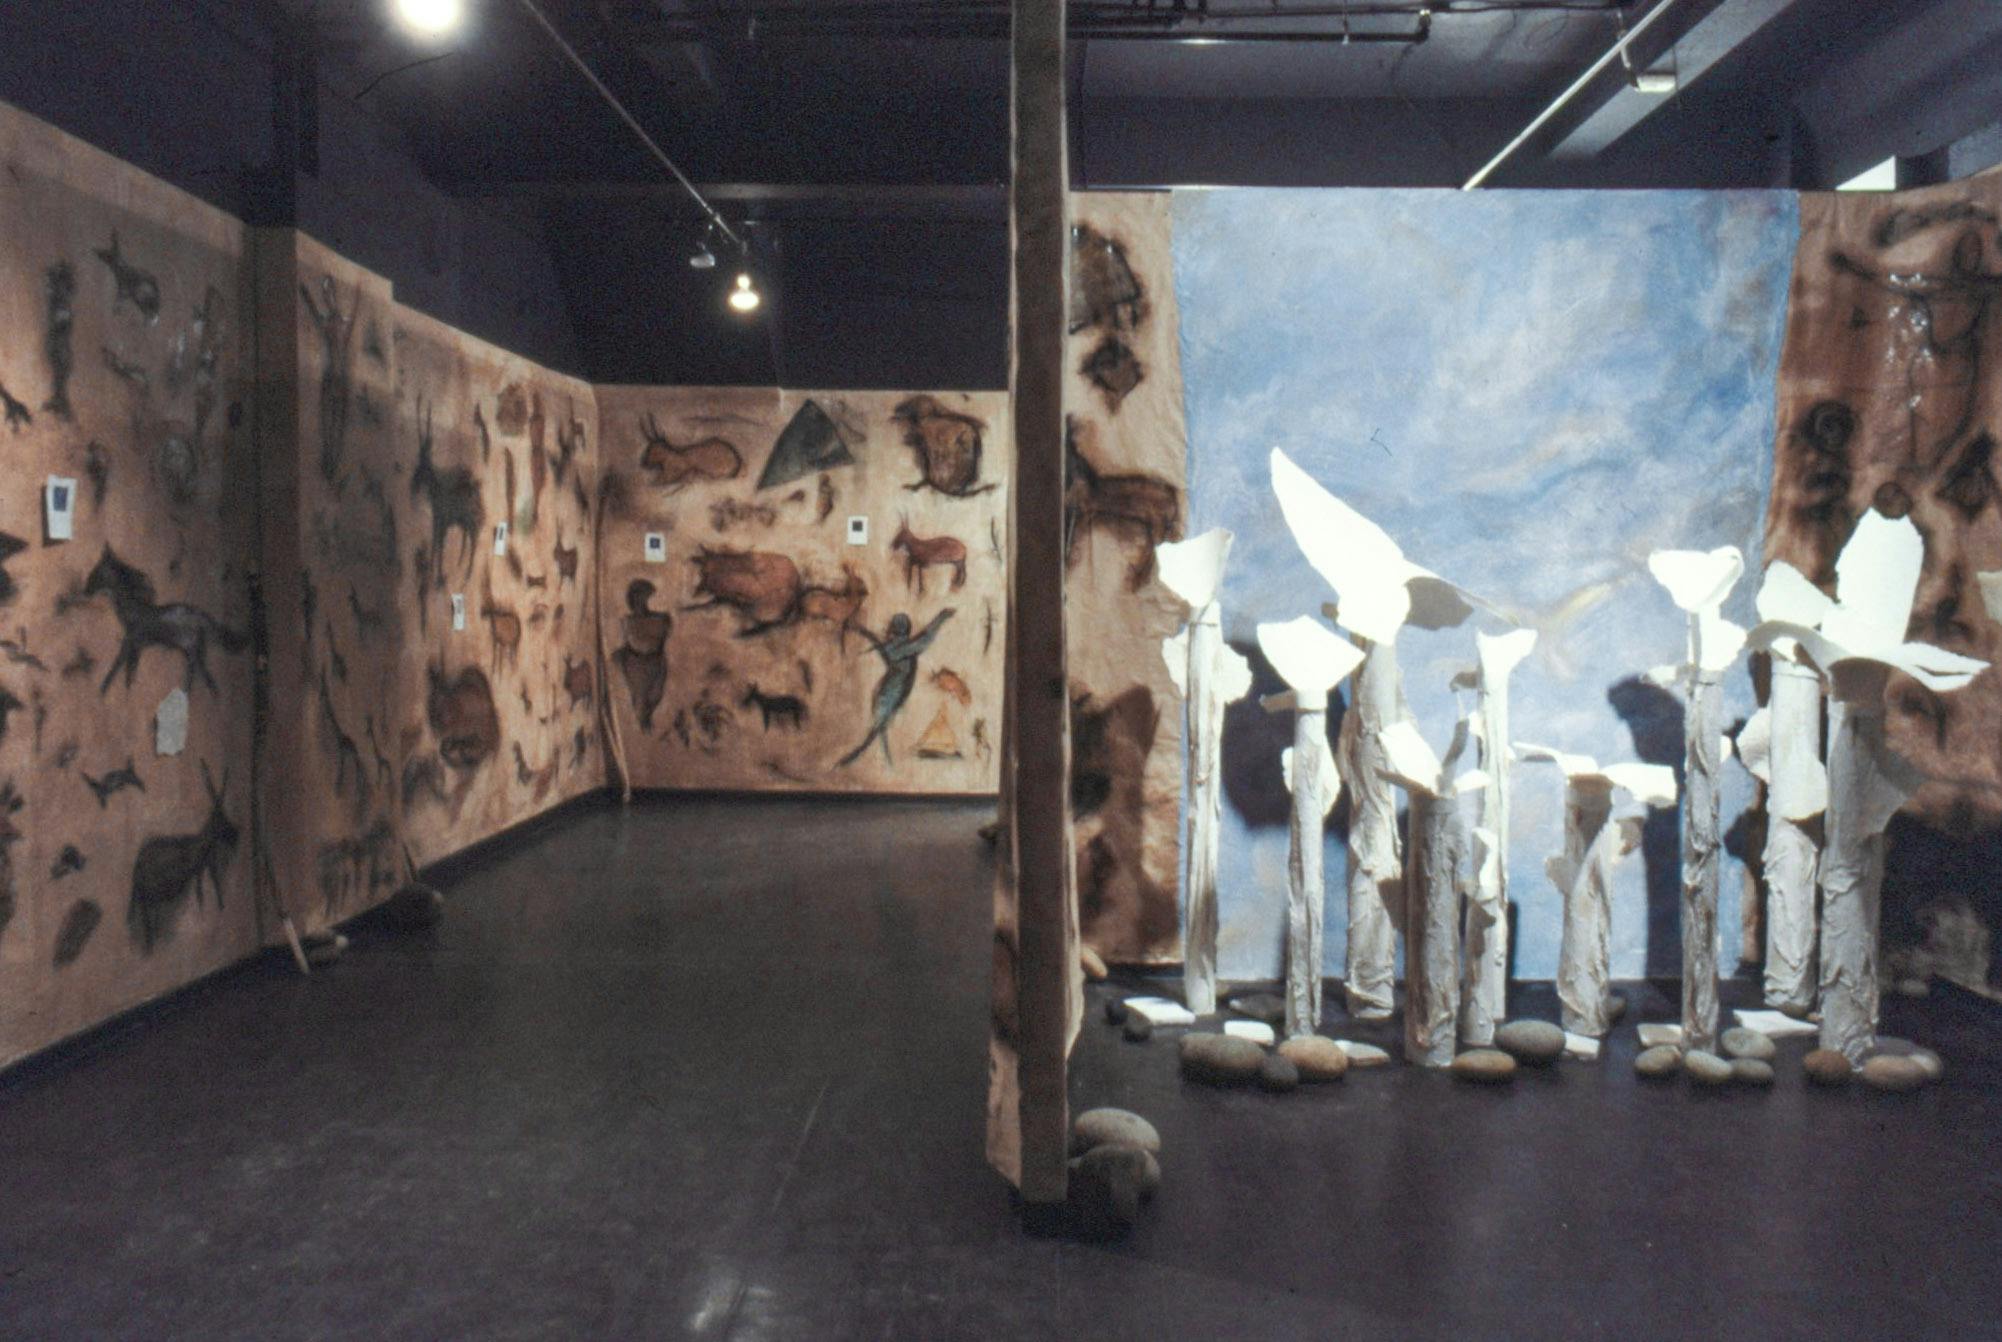 The walls of a room are lined with large chalky drawings of animals and humans. One section is divided and has a large blue patch painted as sky, tall white sculptures, and many rocks on the floor.